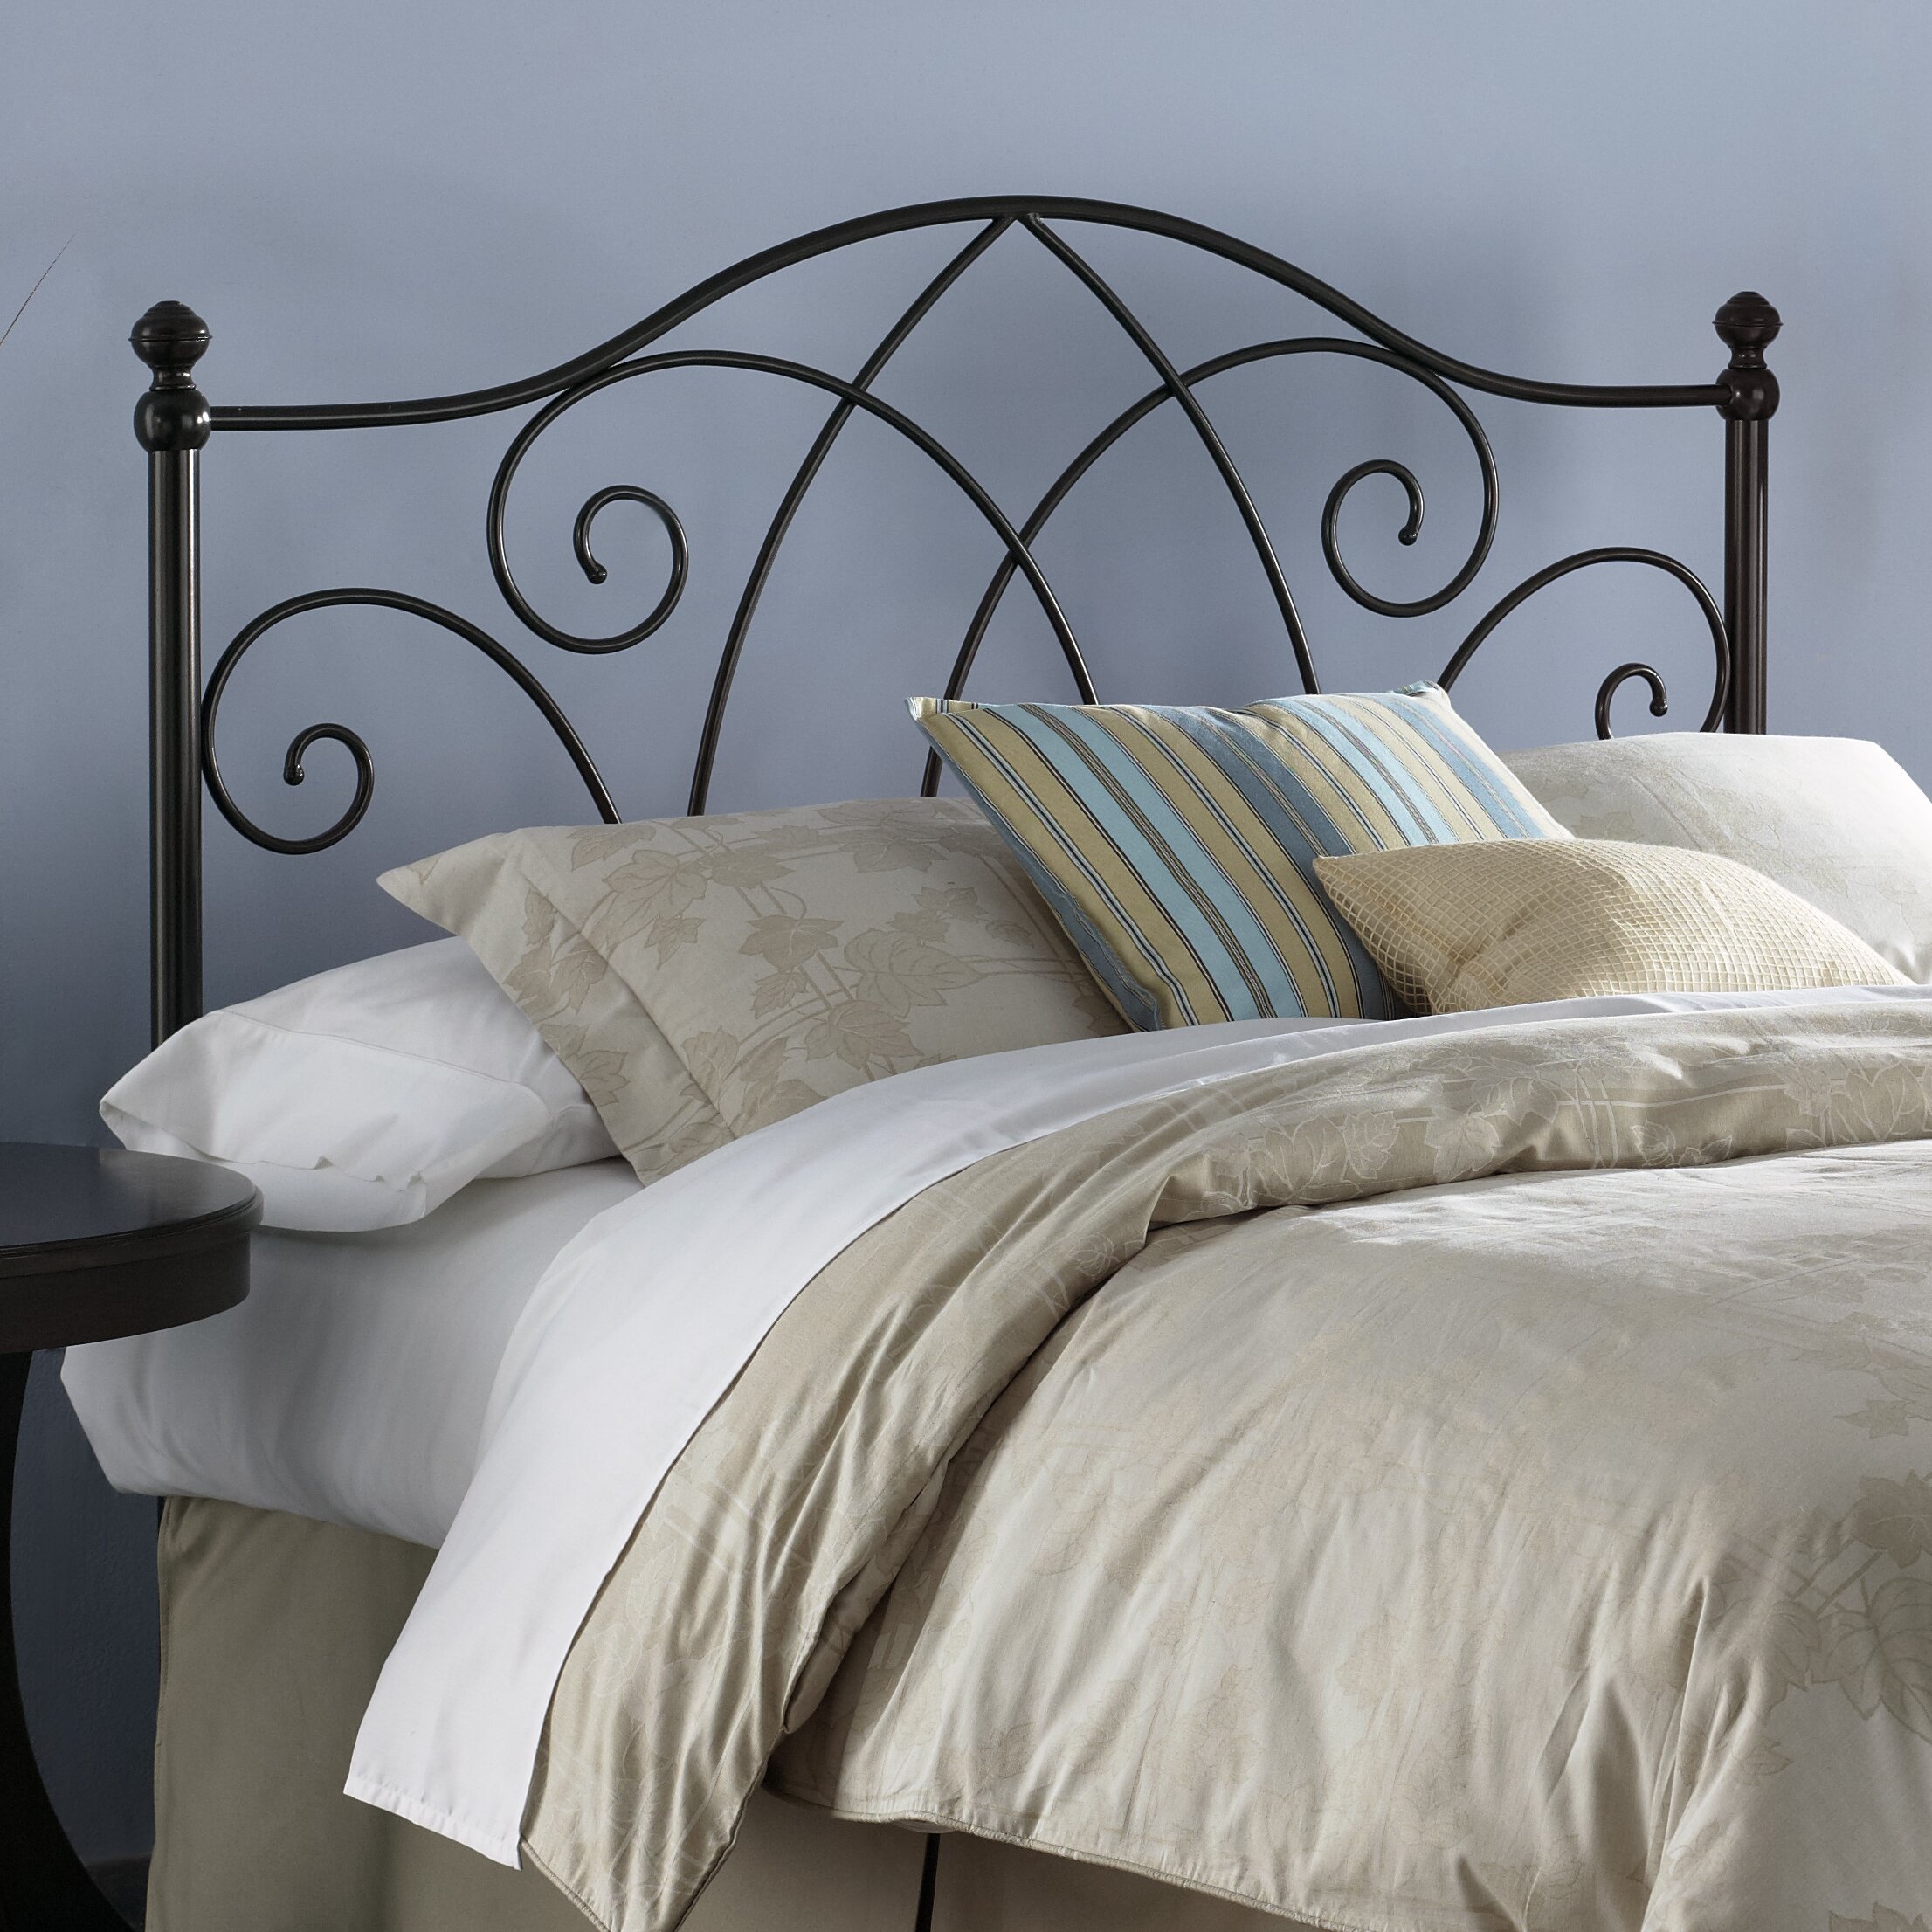 Fashion Bed Group Deland Metal Headboard And Reviews Wayfair